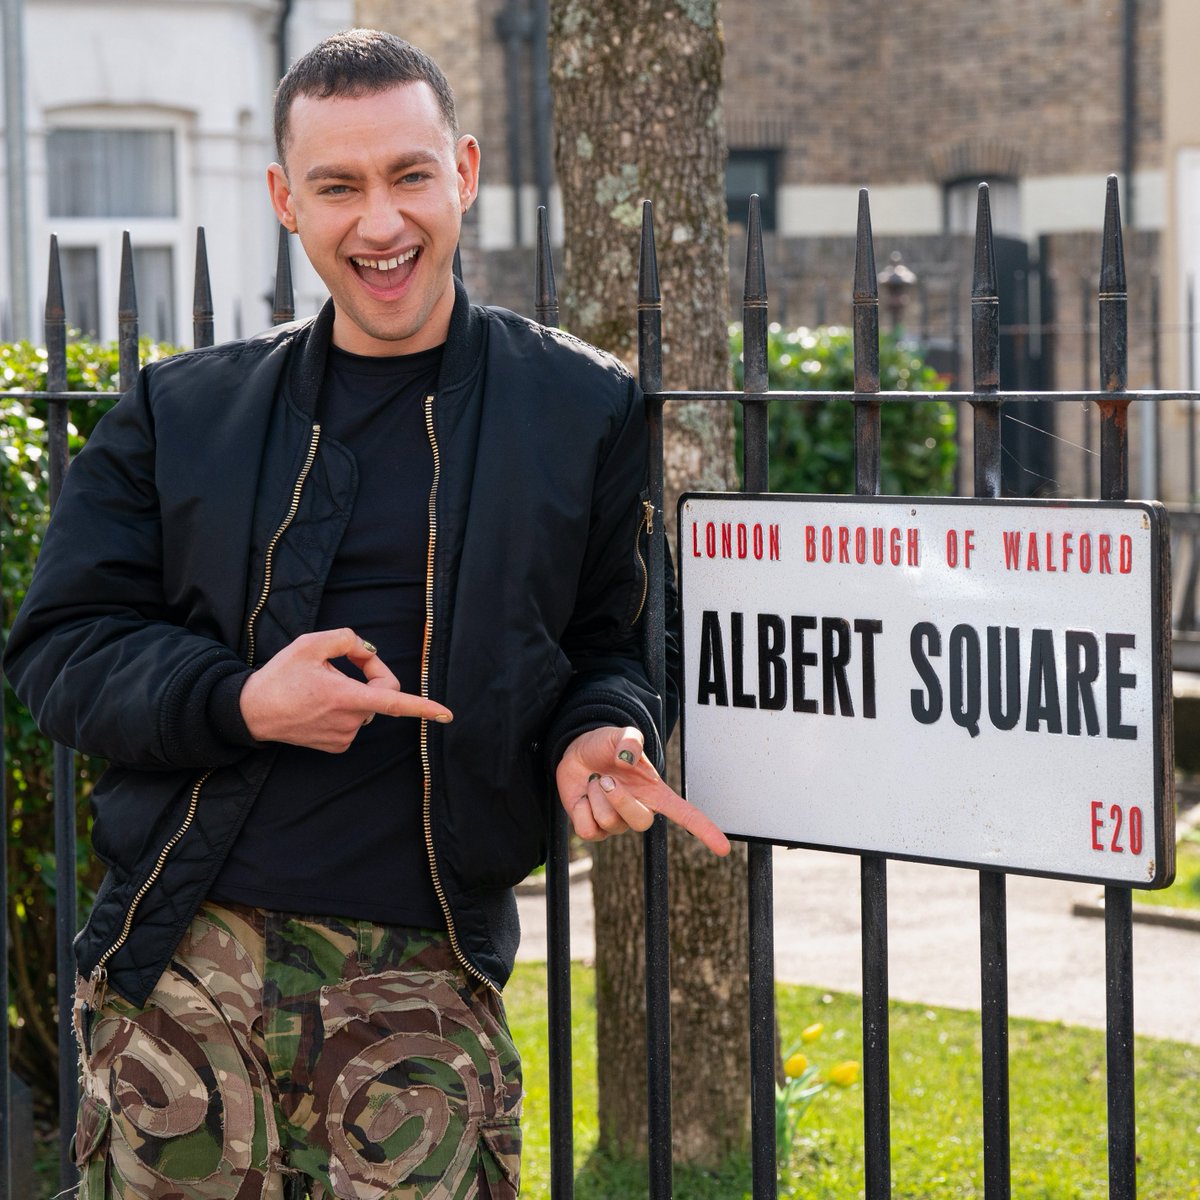 📢 Olly Alexander is coming to Walford! Ahead of his performance at the Eurovision song contest, Olly is set to make a surprise visit to #EastEnders' Albert Square... Read more ➡️ bbc.co.uk/mediacentre/20…